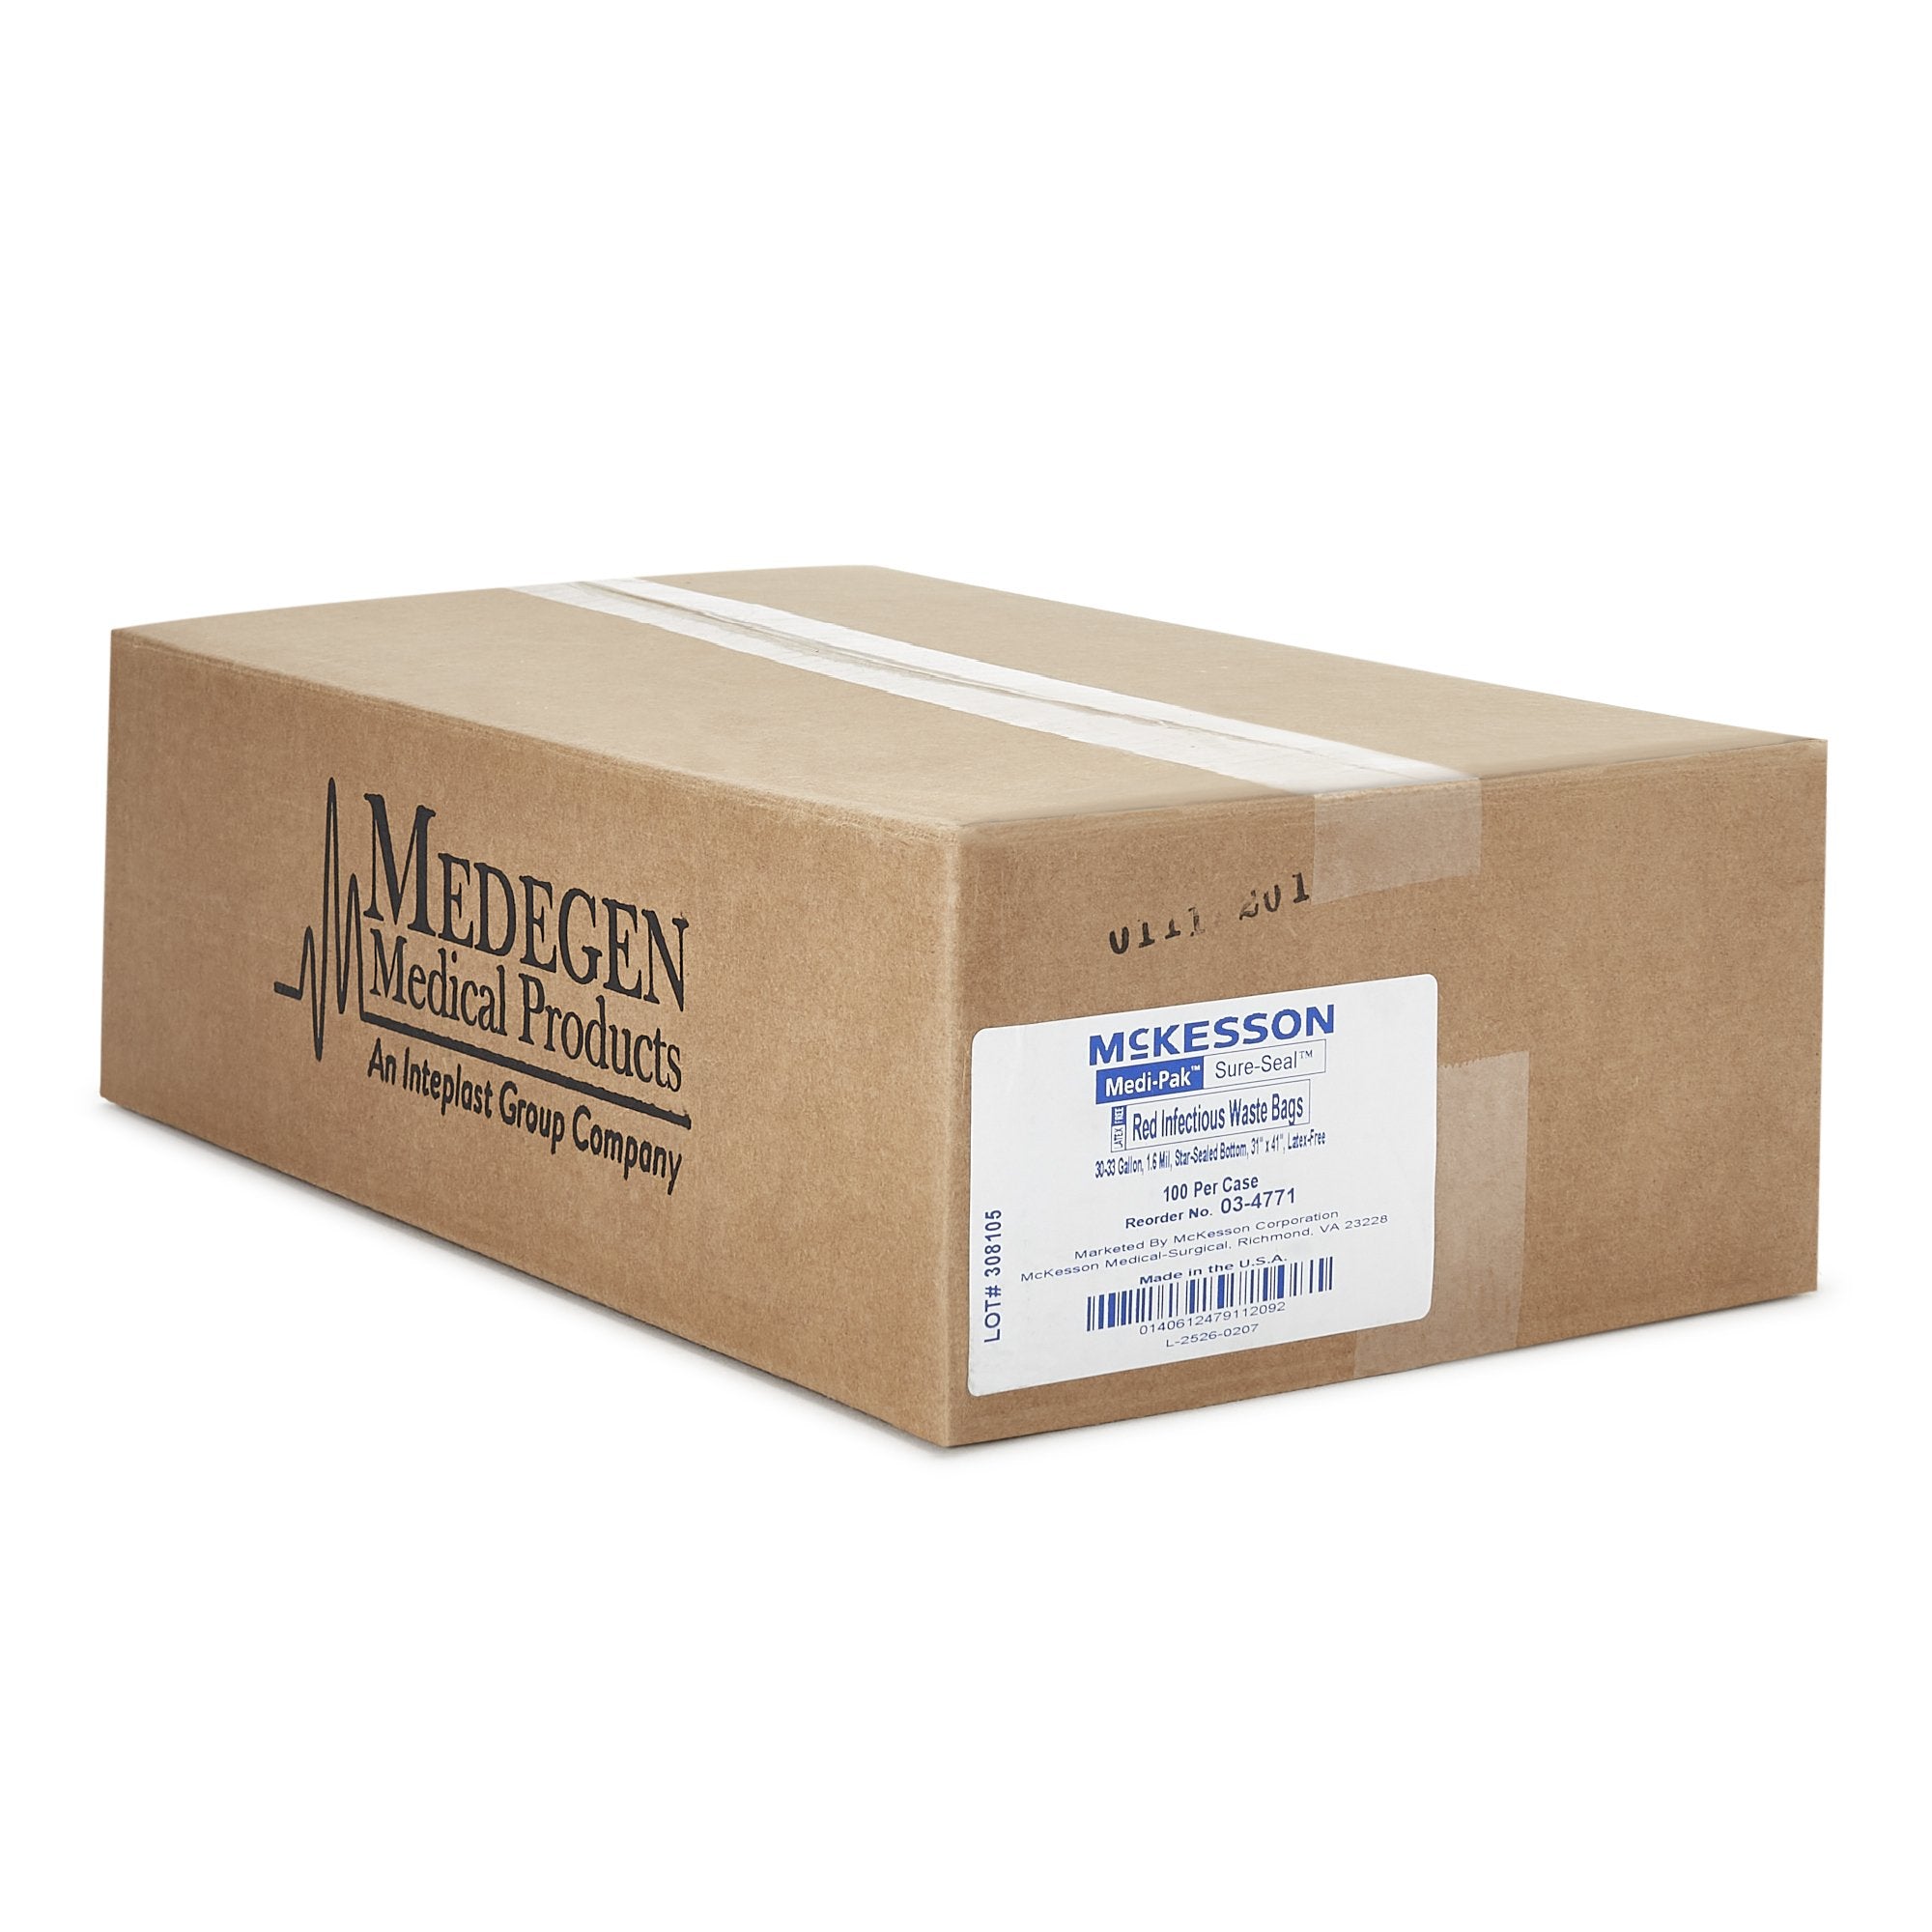 Infectious Waste Bag McKesson 30 to 33 gal. Red Bag LLDPE 31 X 41 Inch